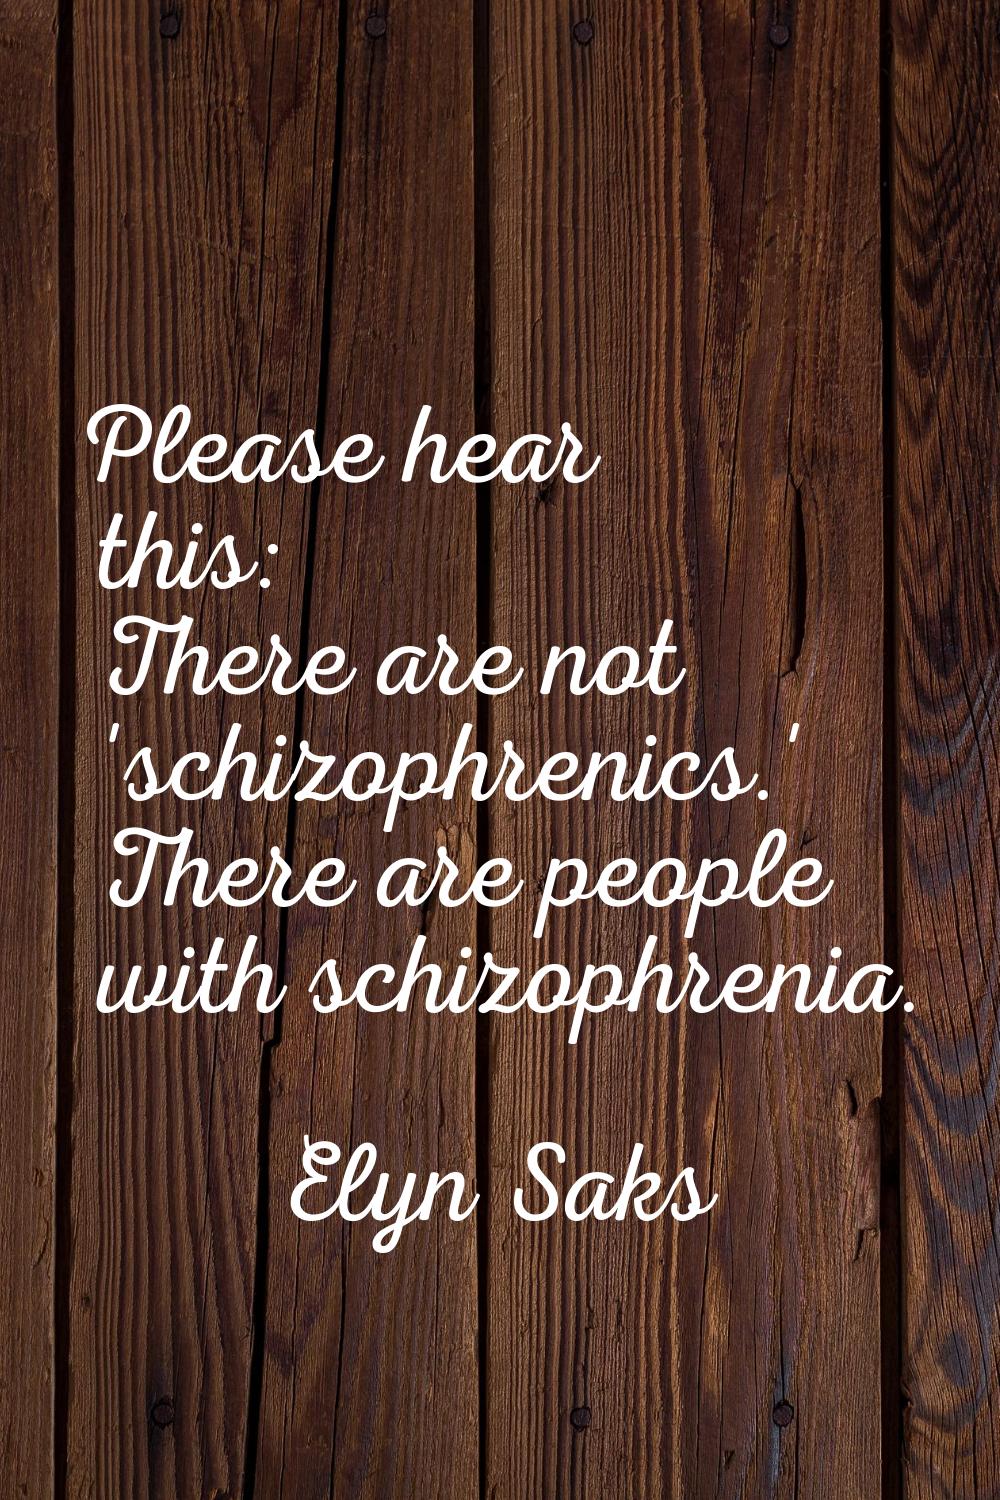 Please hear this: There are not 'schizophrenics.' There are people with schizophrenia.